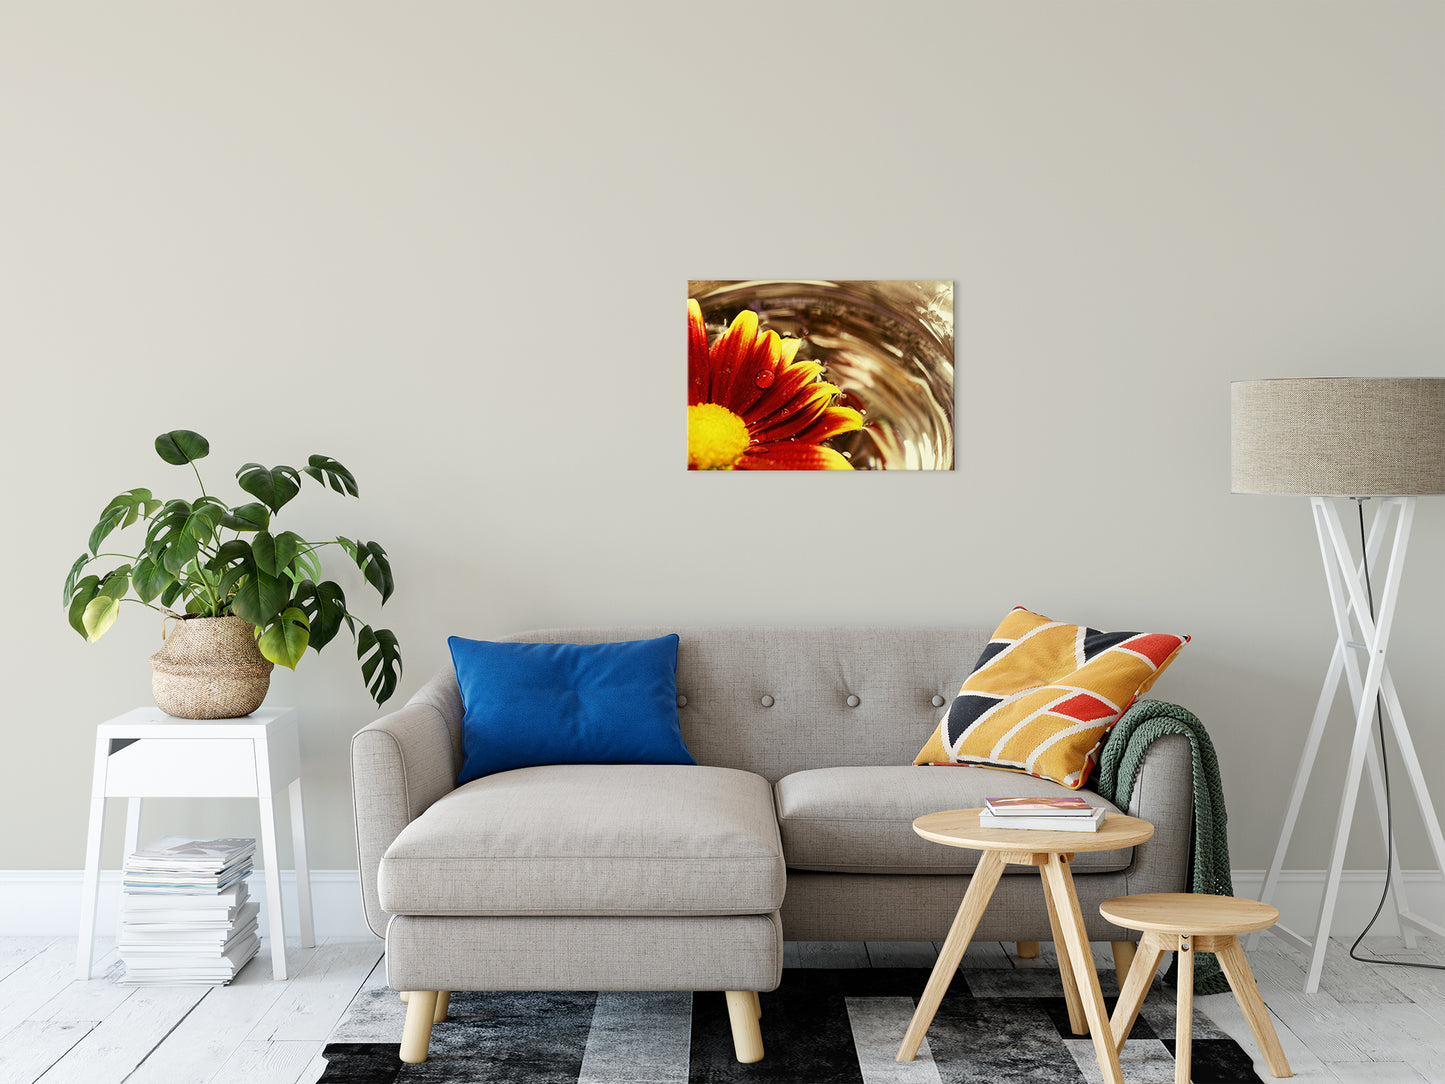 Floating Mum Nature / Floral Photo Fine Art Canvas Wall Art Prints 20" x 24" - PIPAFINEART